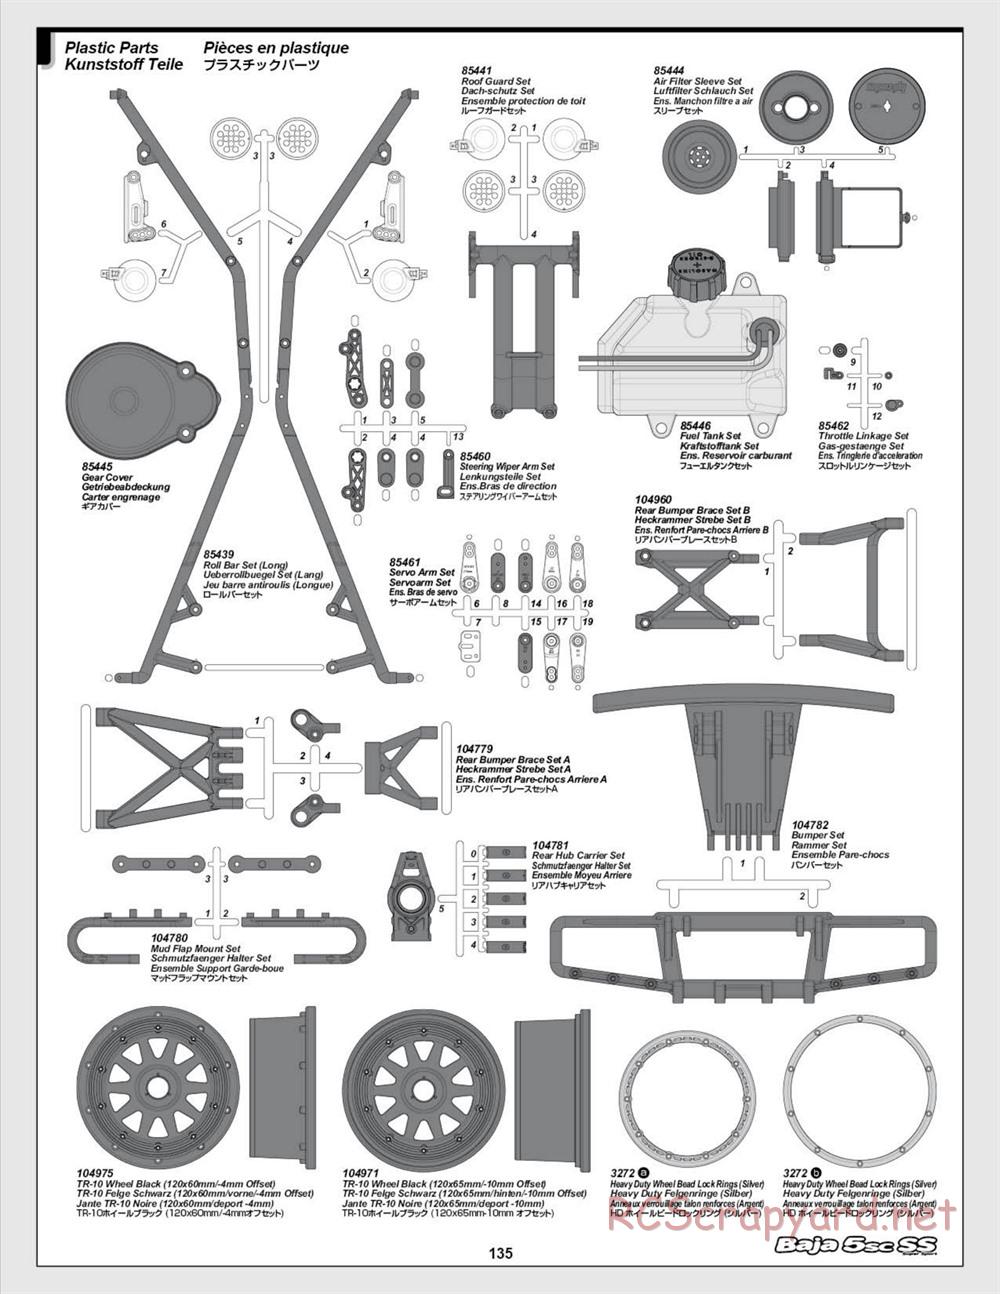 HPI - Baja 5SC SS - Exploded View - Page 135